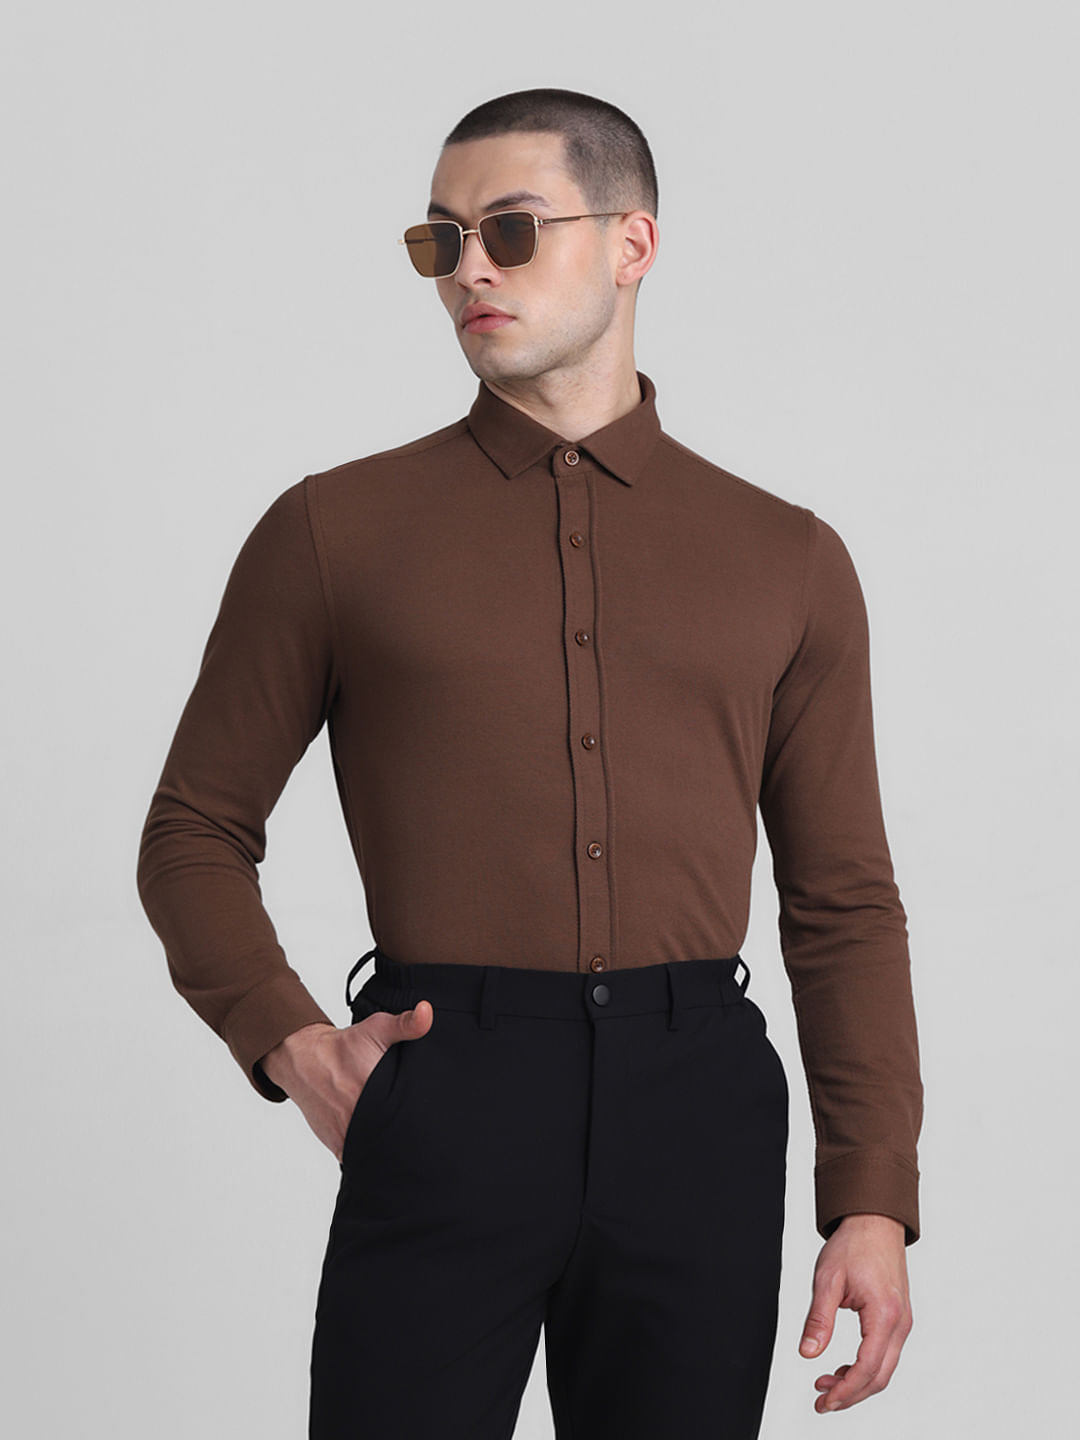 Is a black shirt considered formal? - Quora